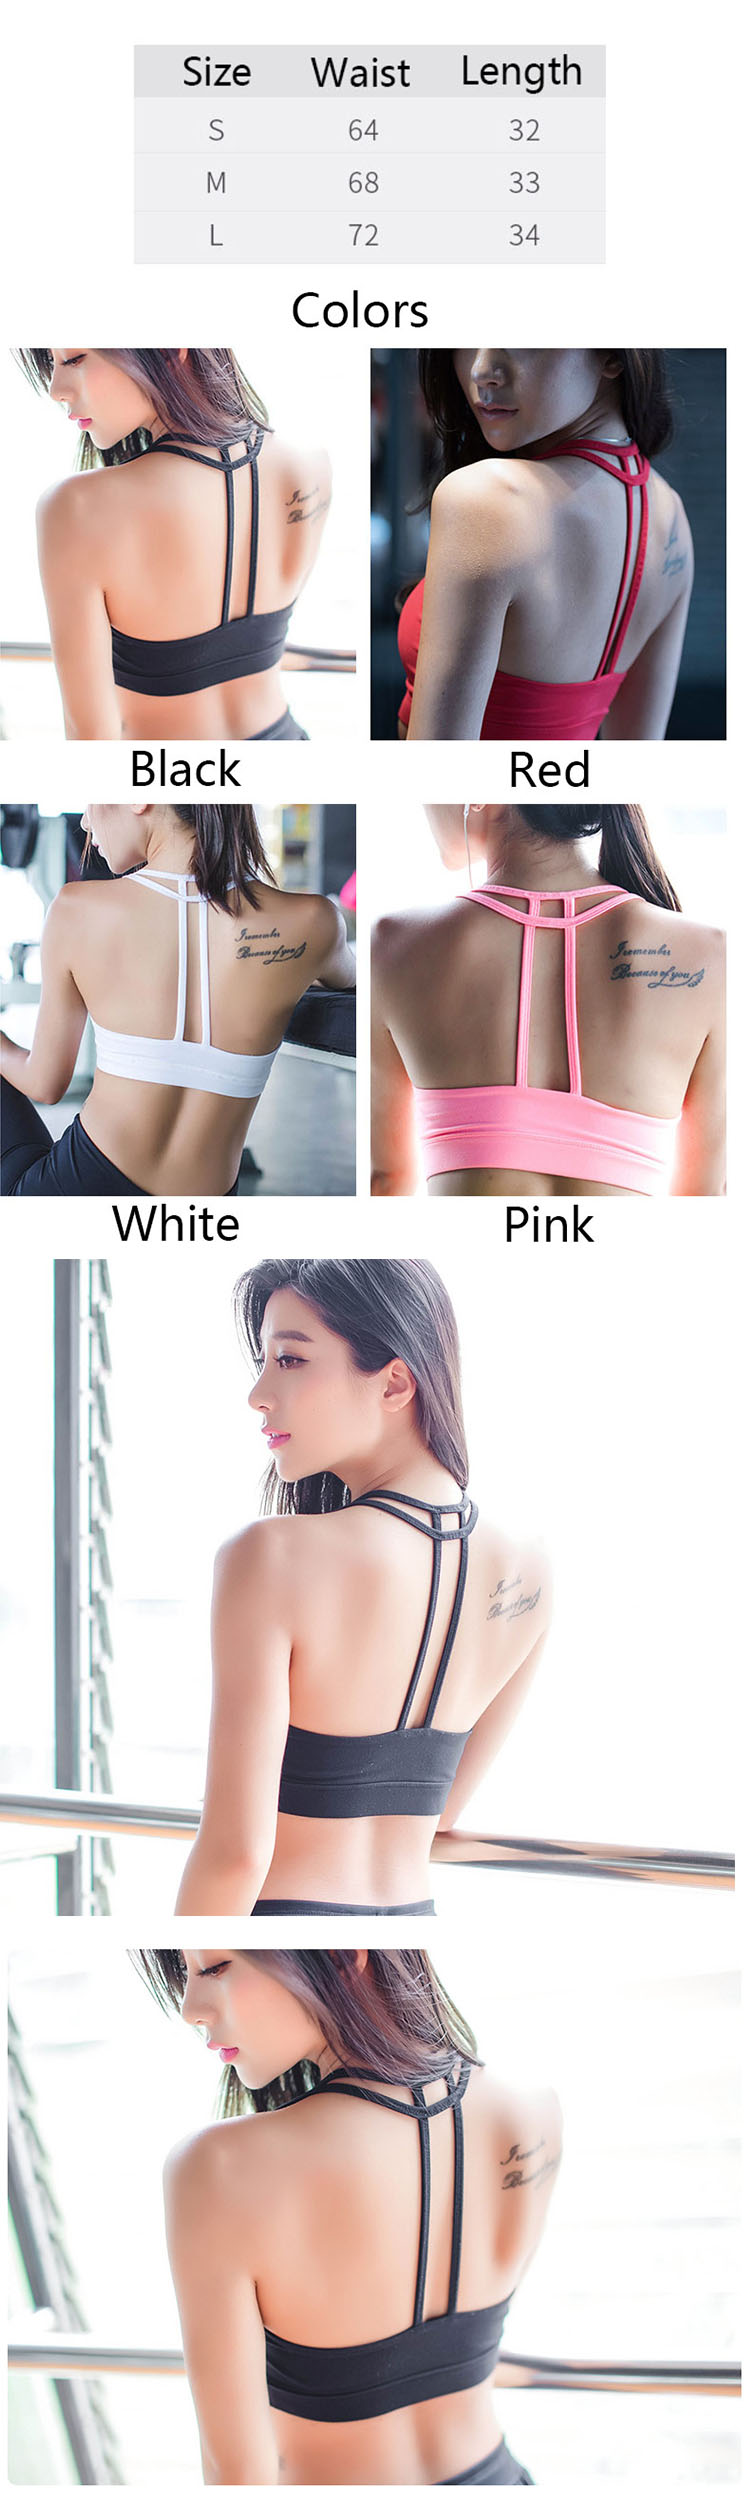 The white strappy sports bra design makes the underwear more refined while increasing the sense of lifting